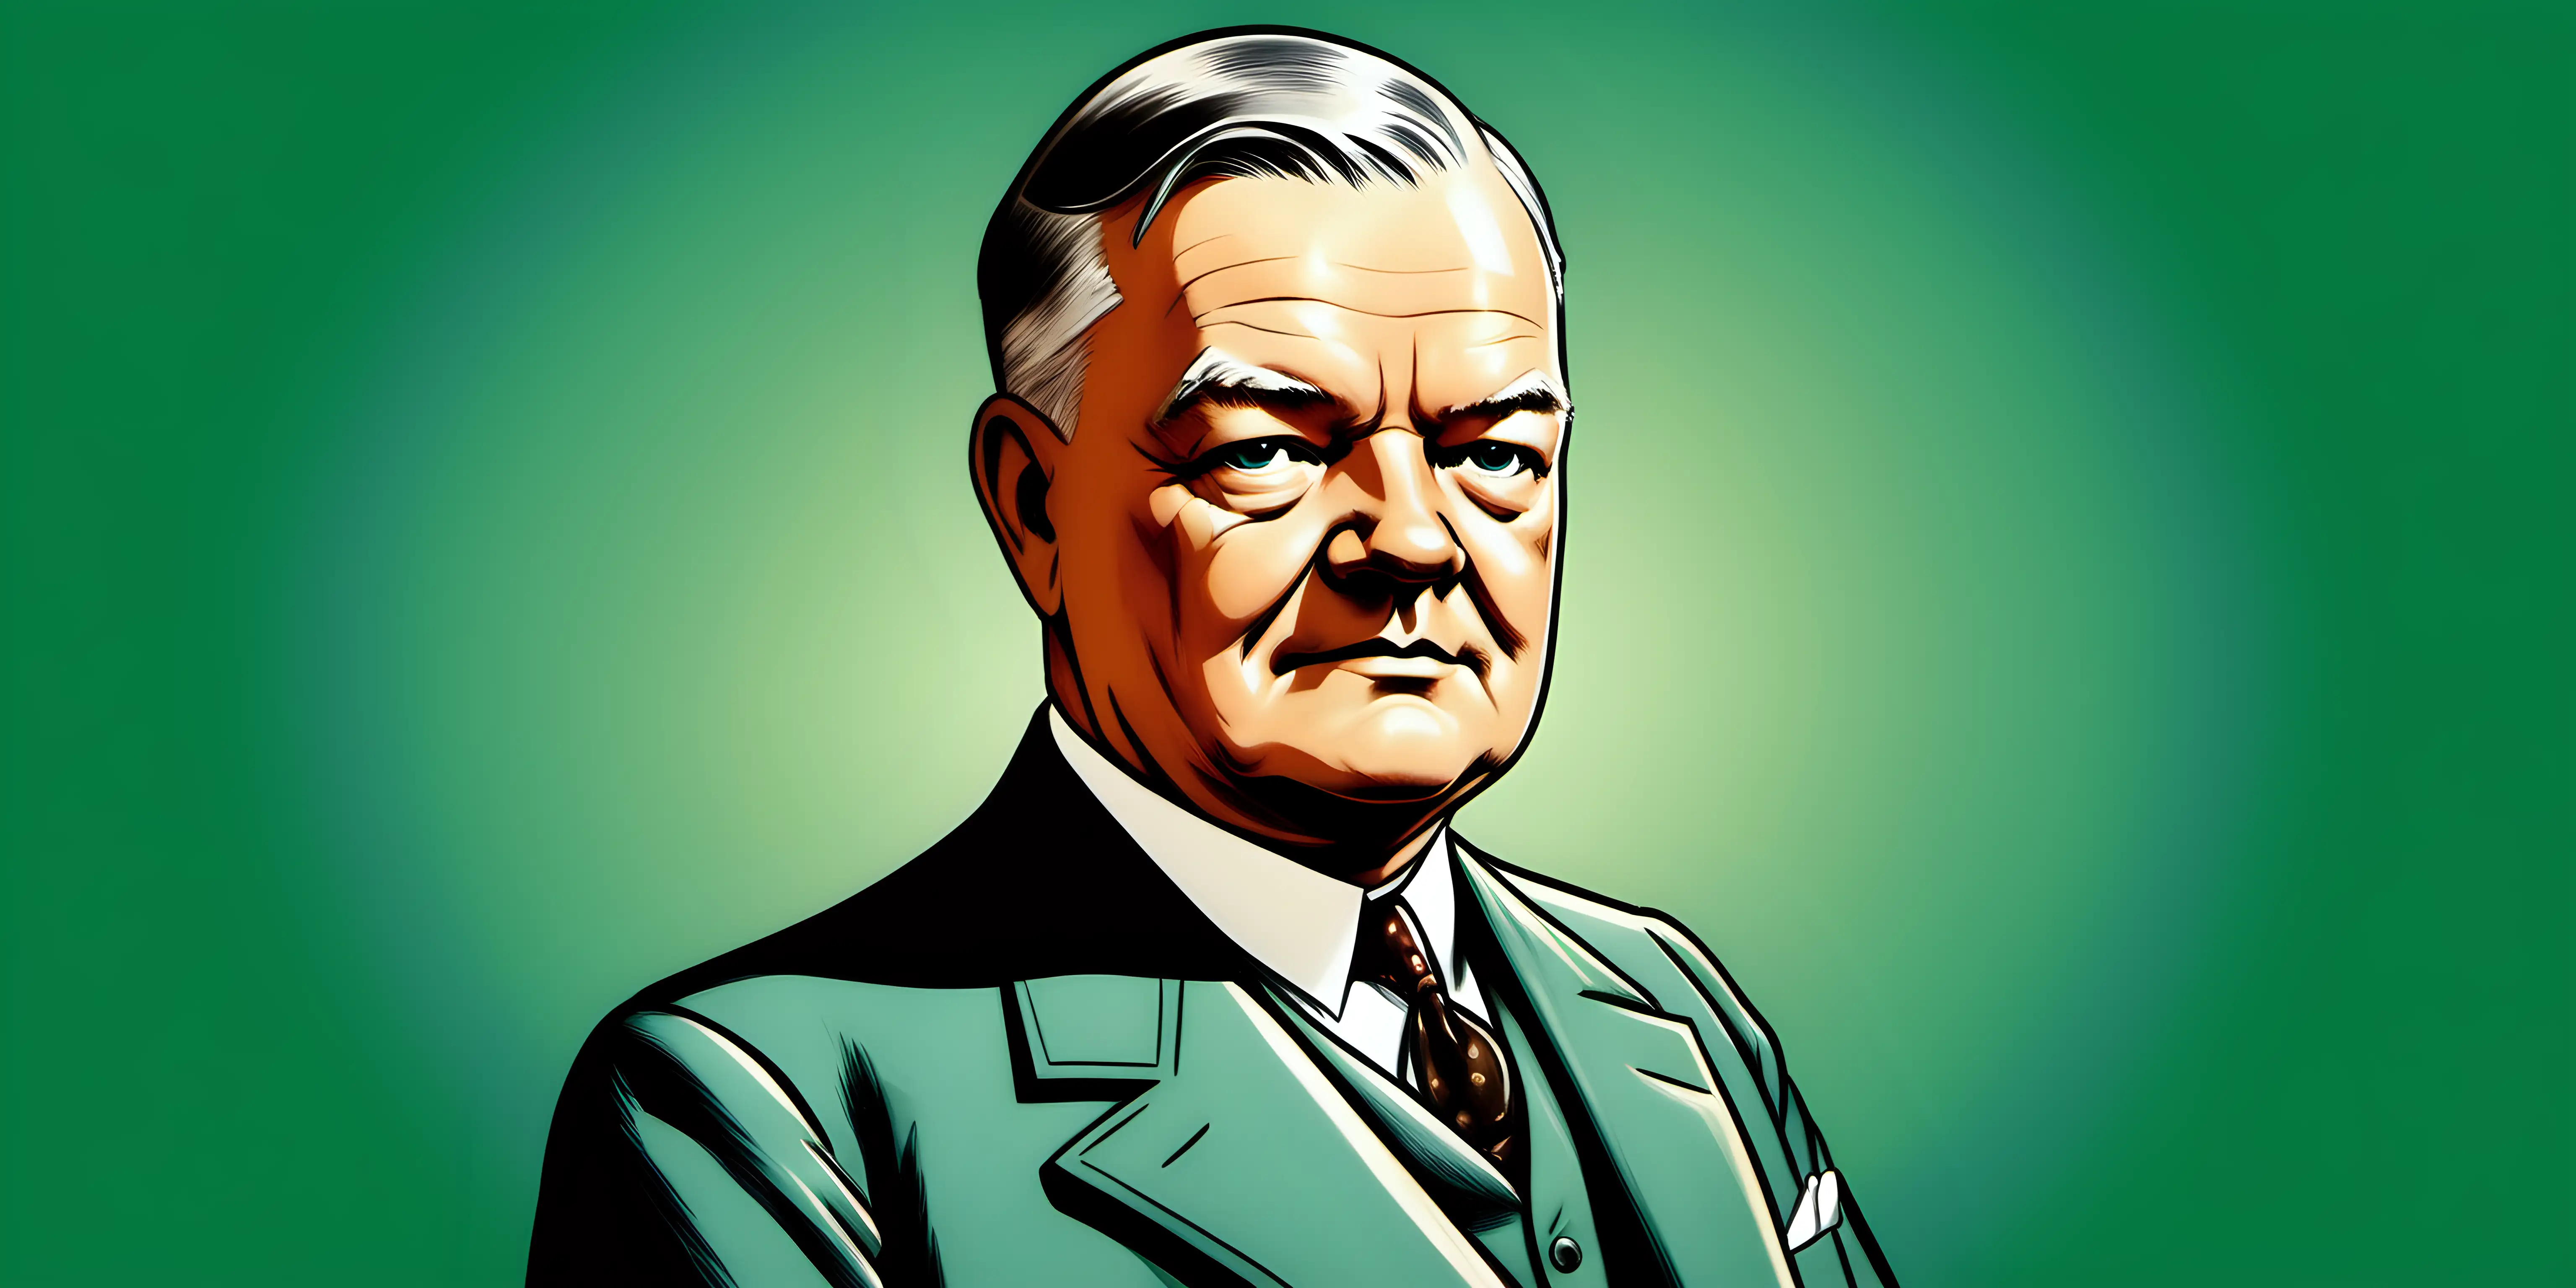 cartoon of Herbert Hoover on a solid background